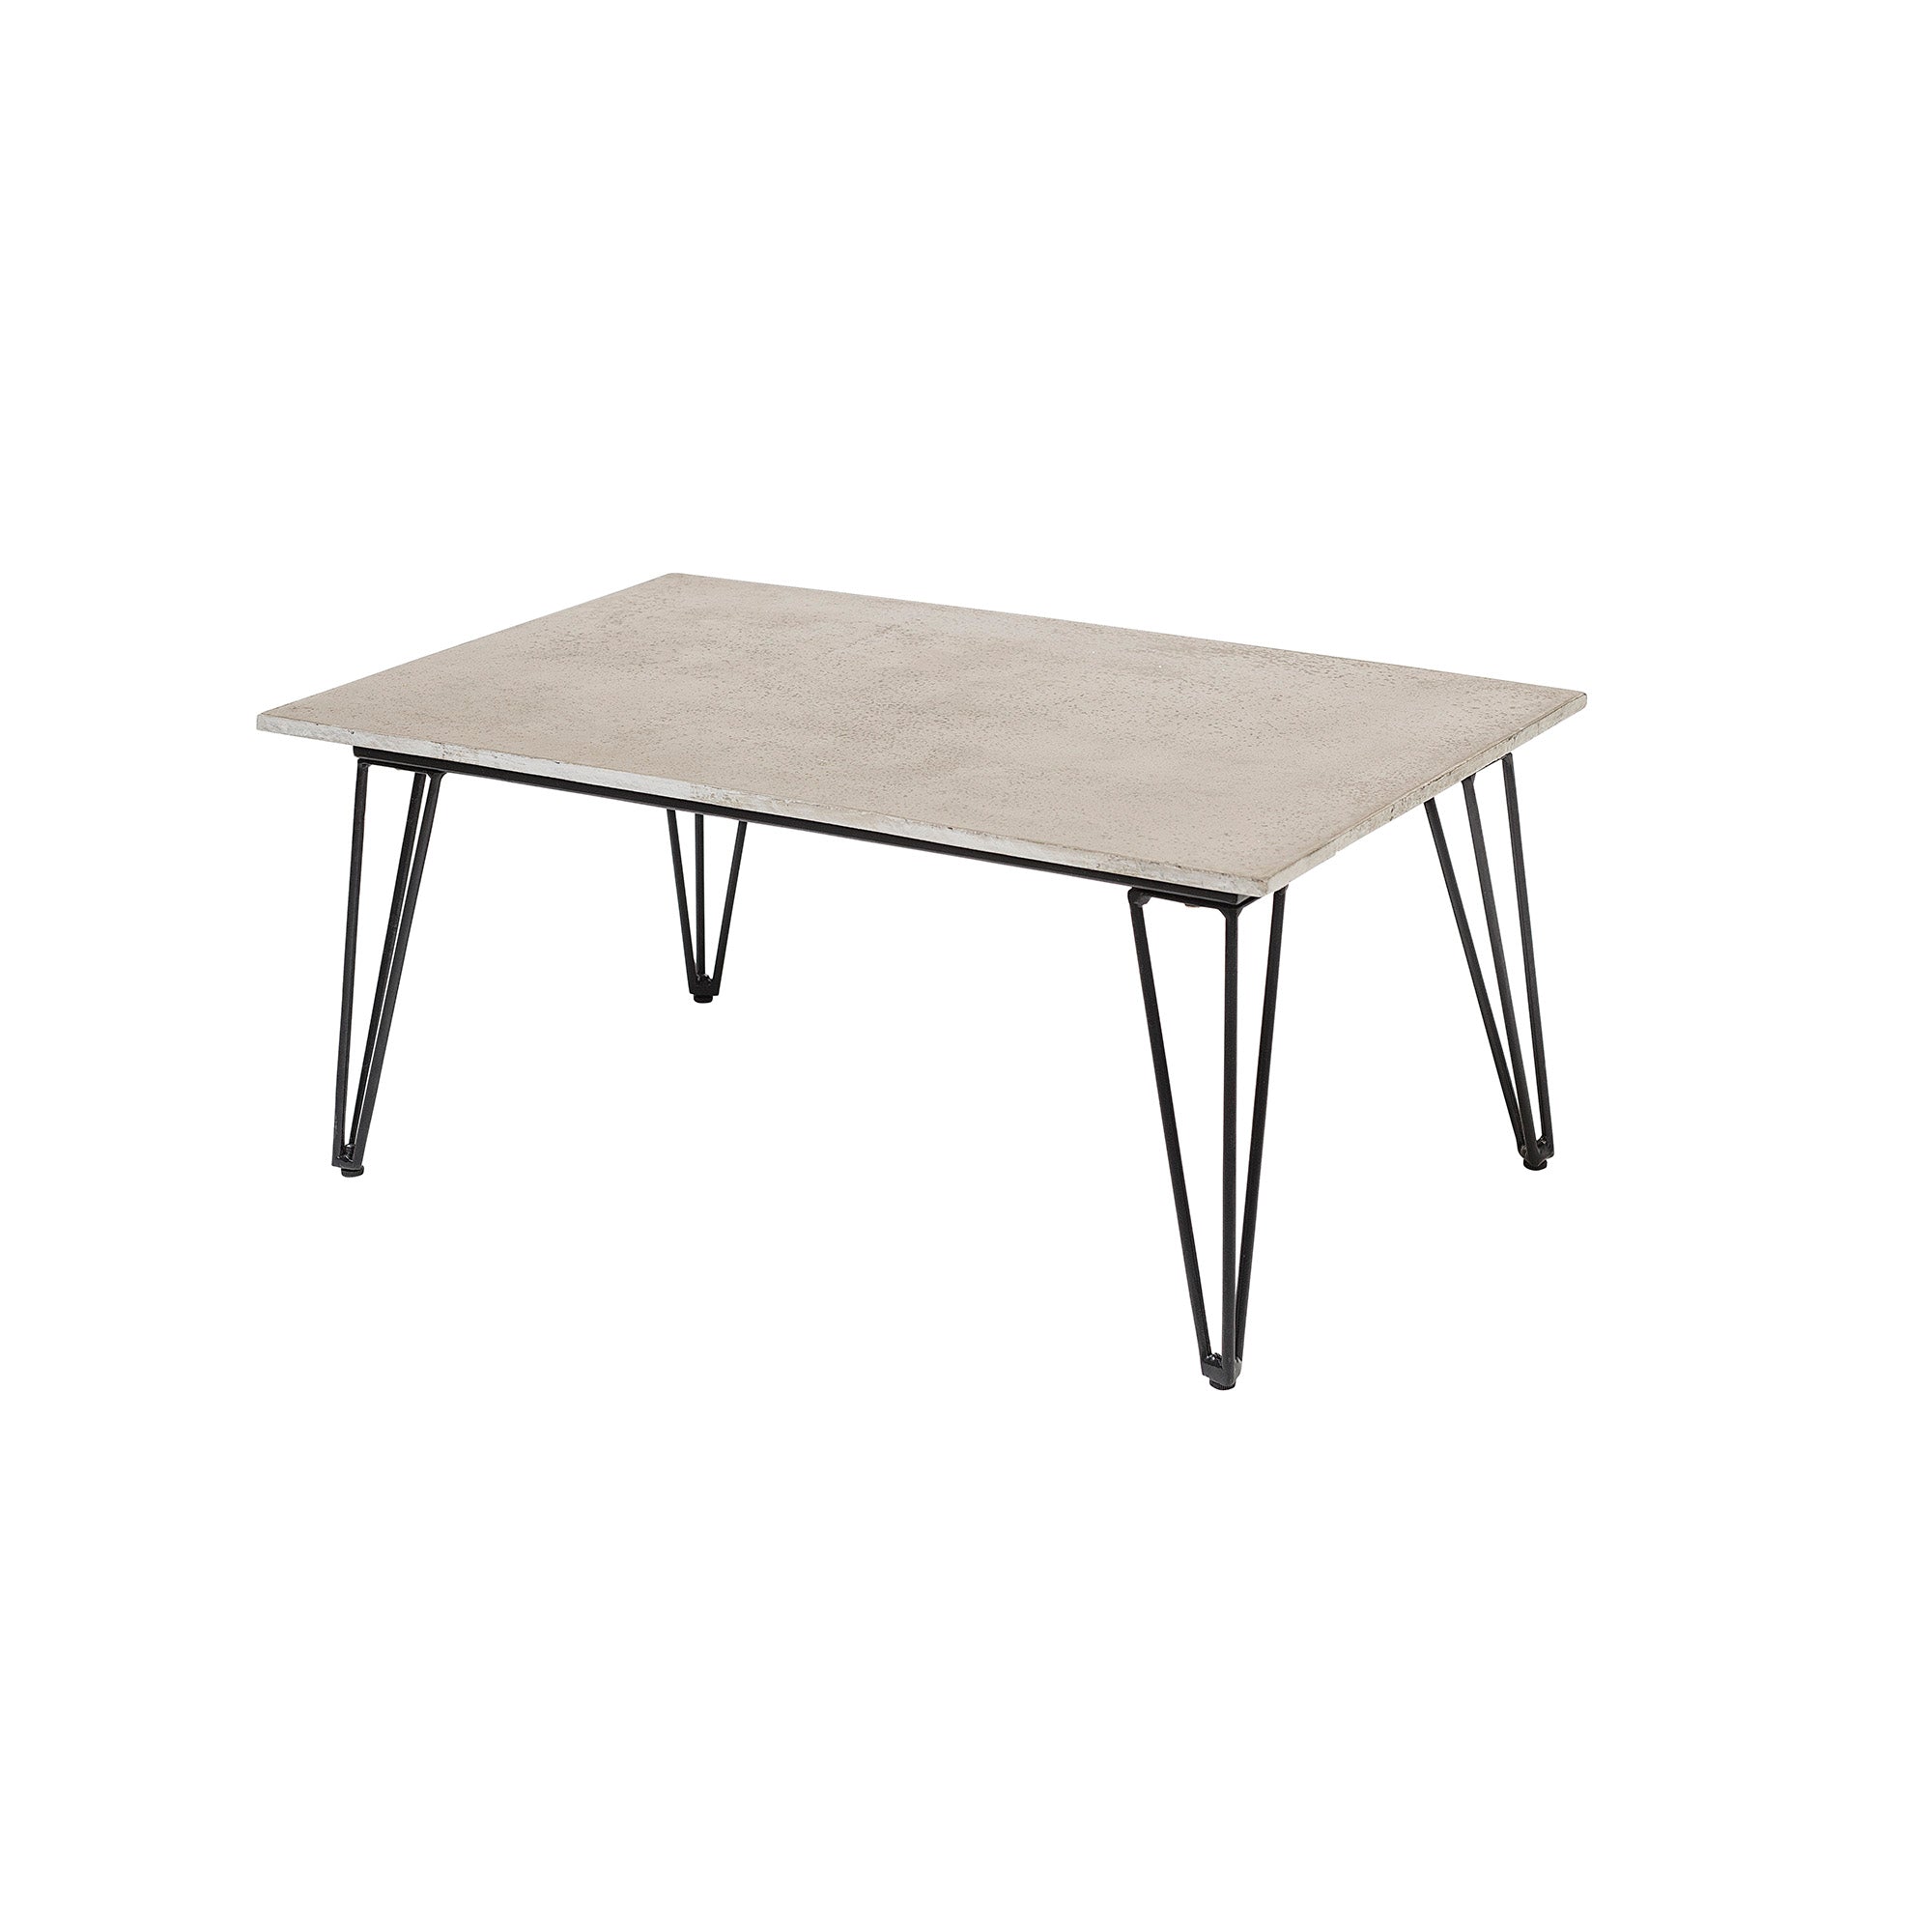 Bloomingville Outdoor Mundo Fiber Cement Coffee Table in Natural